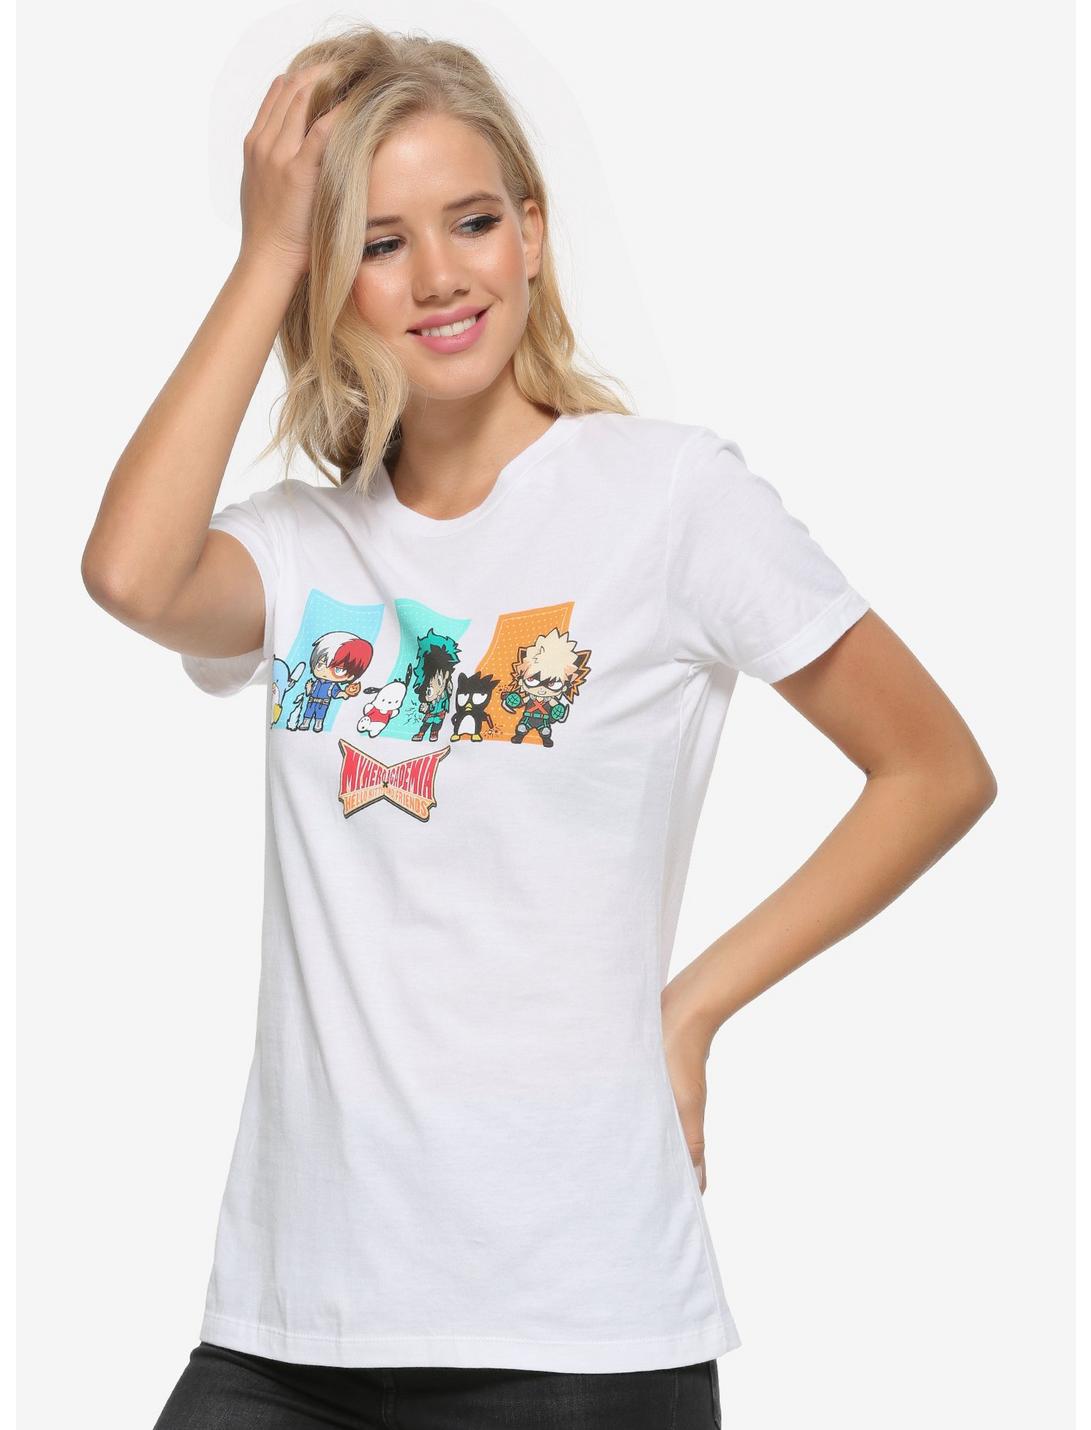 My Hero Academia x Hello Kitty and Friends Boys Club Women's T-Shirt - BoxLunch Exclusive, WHITE, hi-res